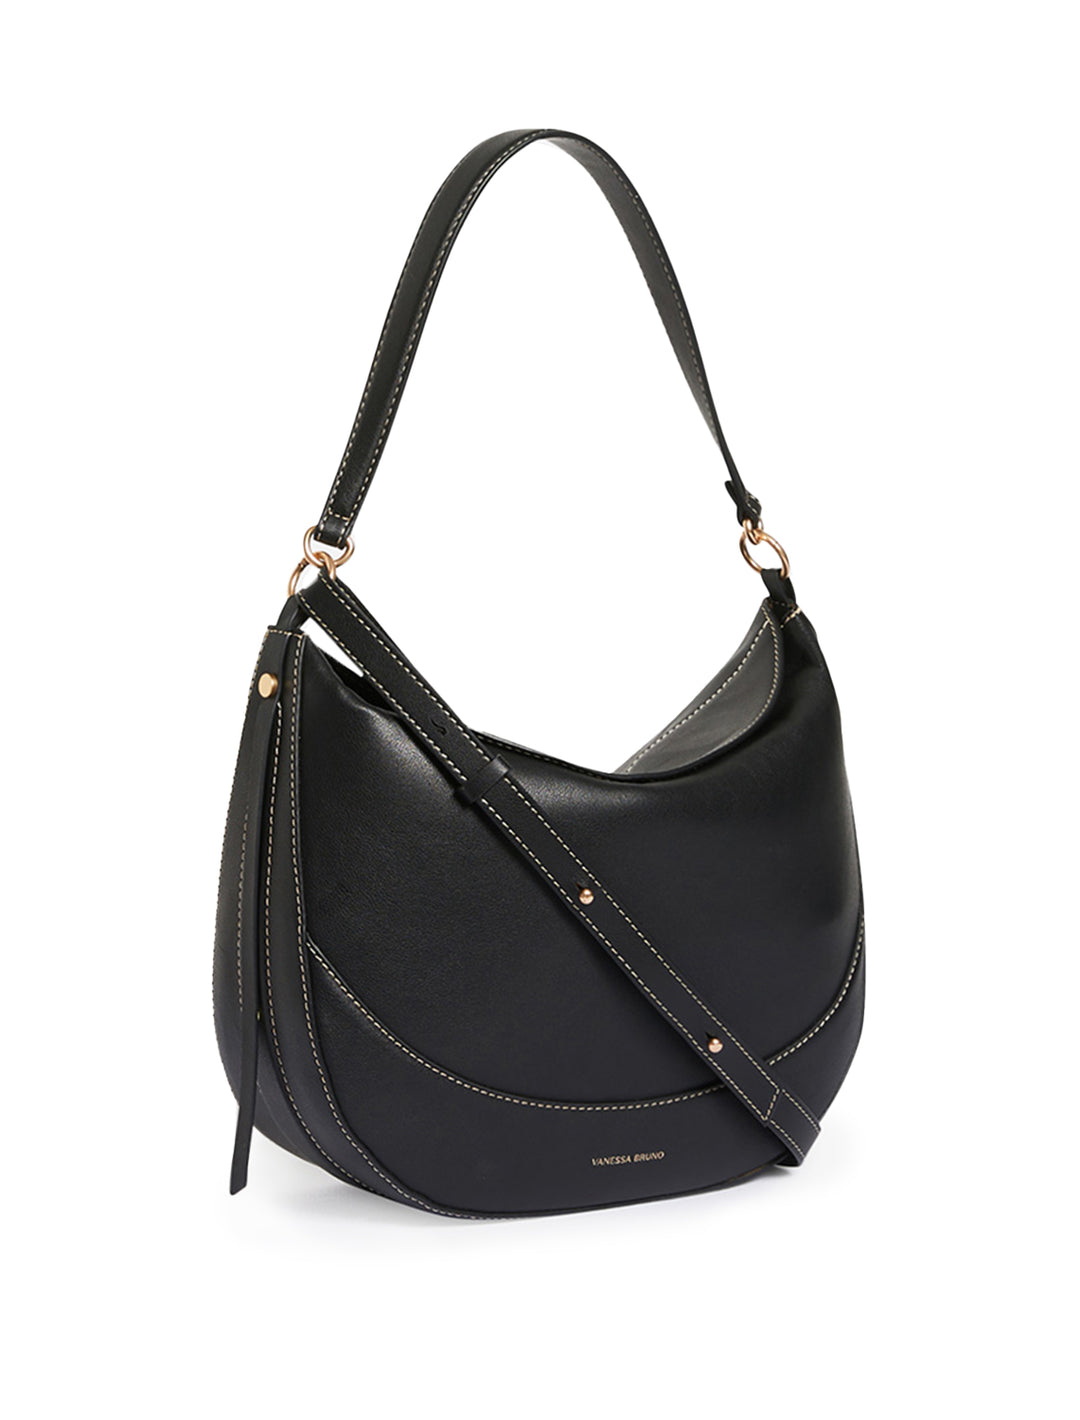 Side angle view of Vanessa Bruno's daily bag in noir.